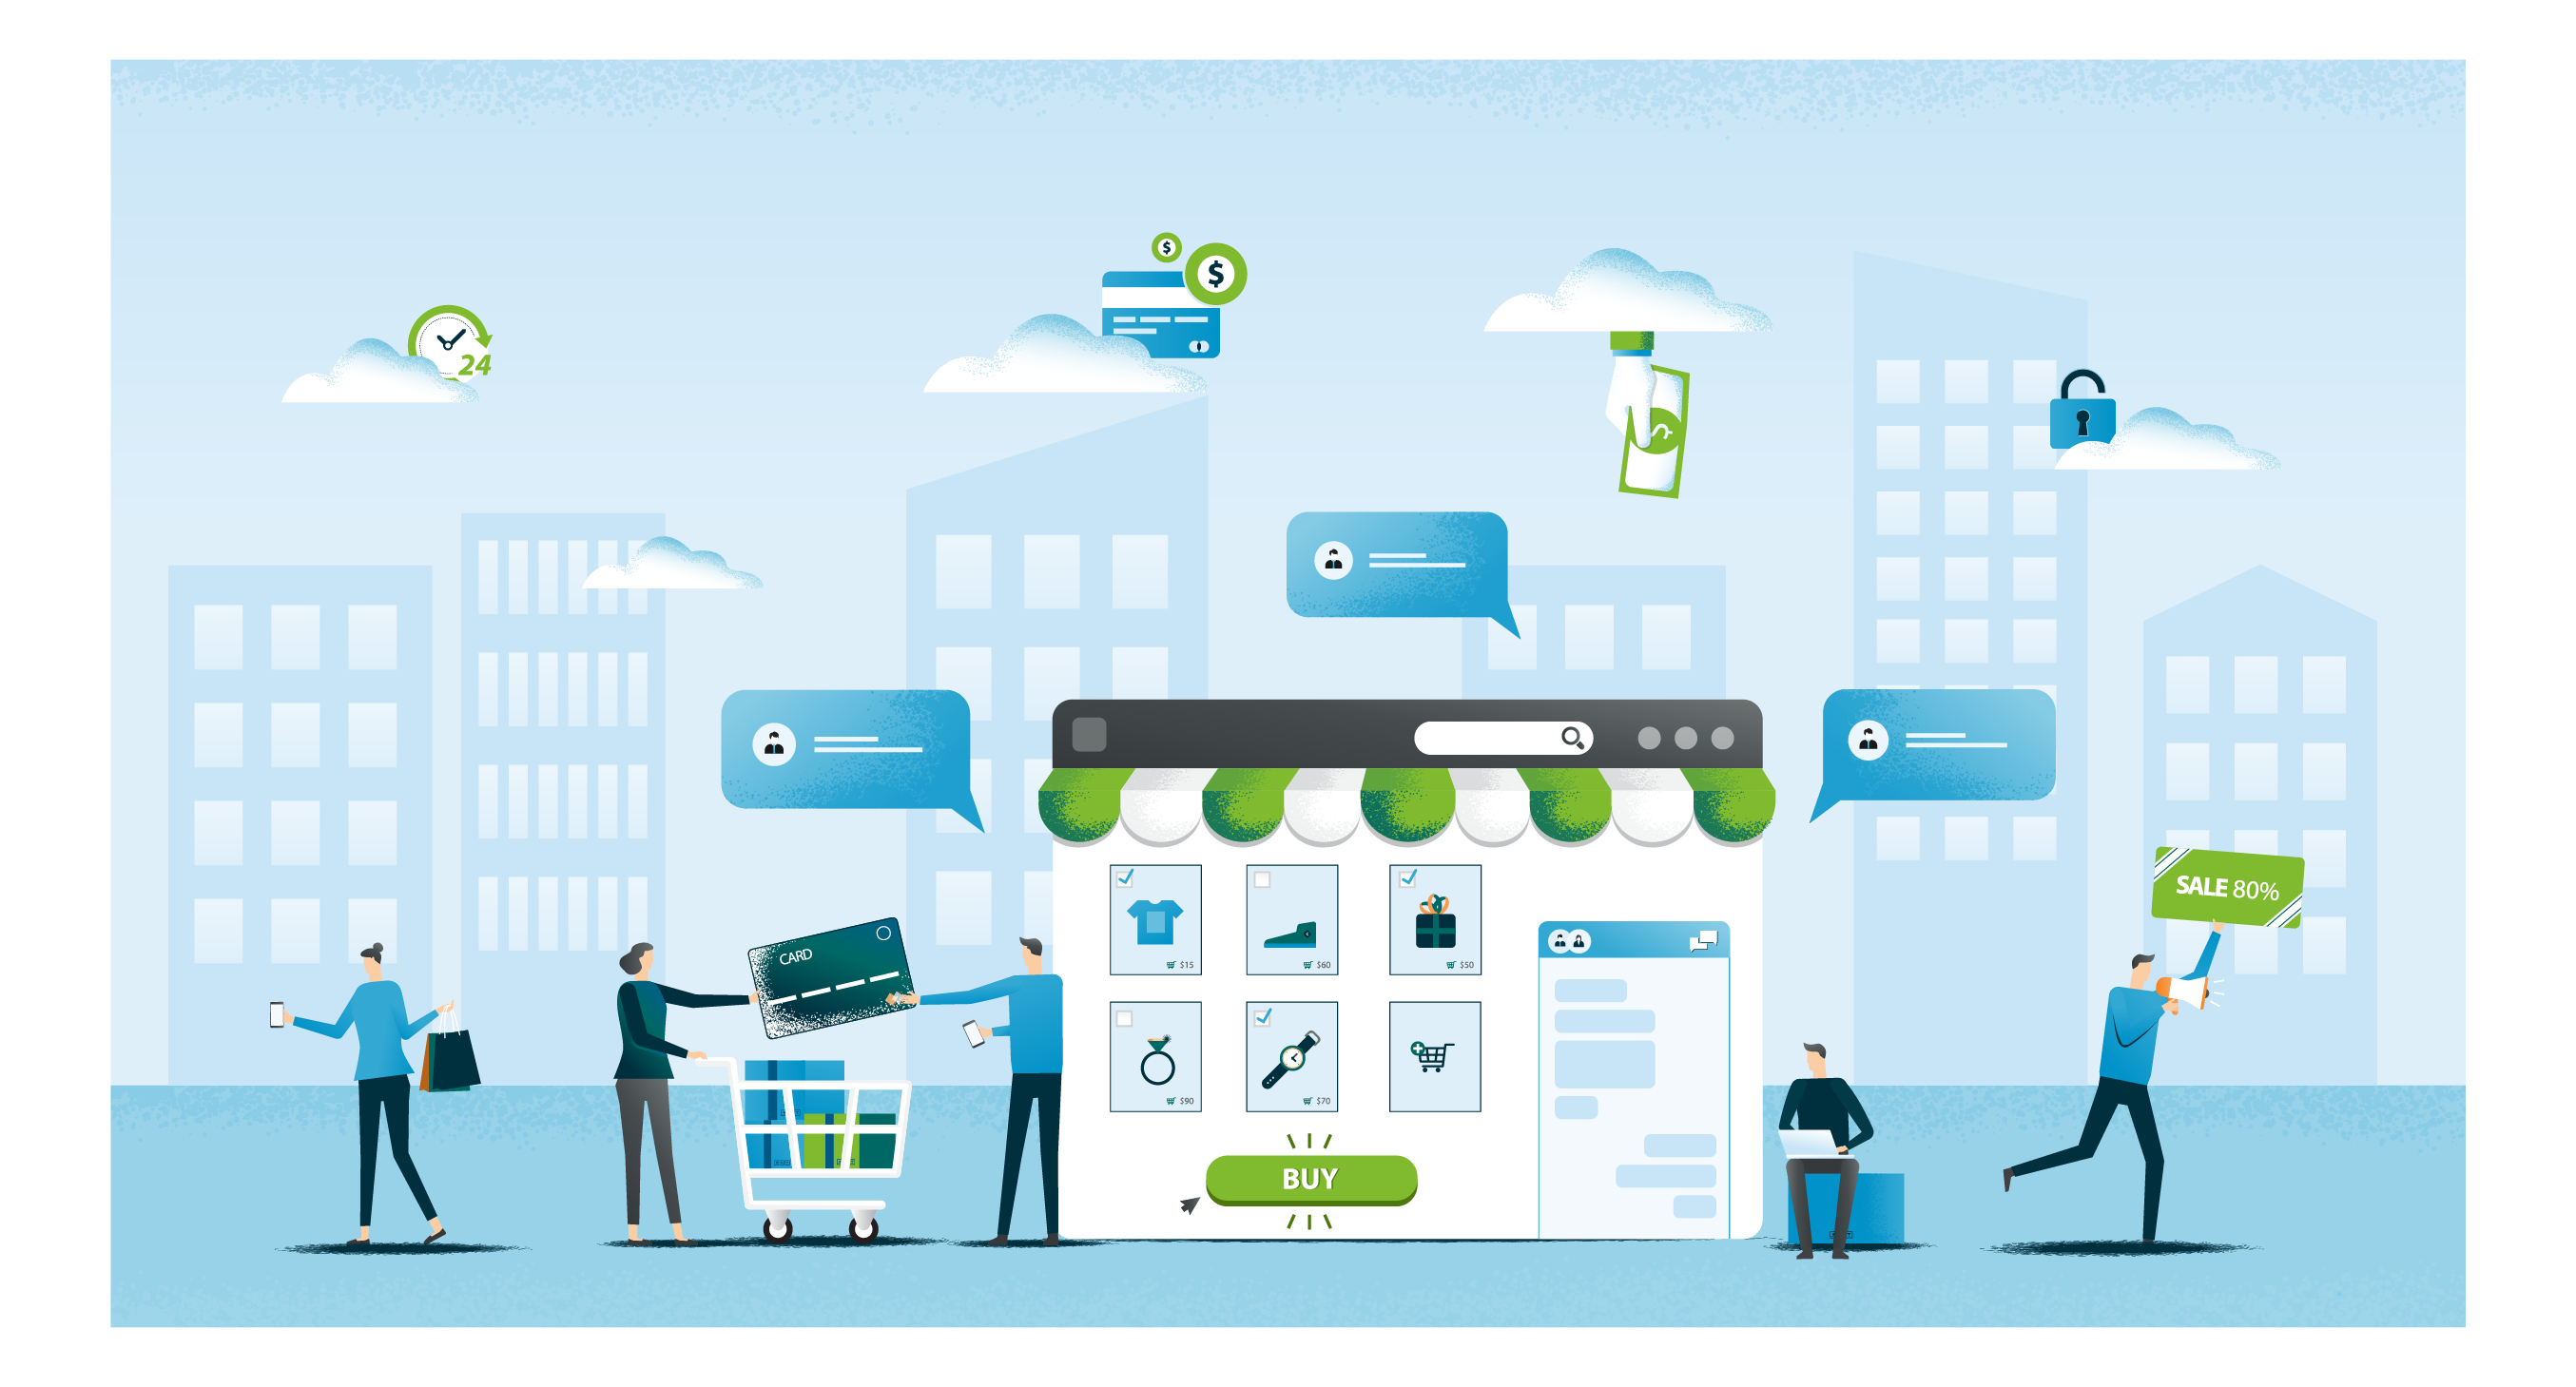 Boost your commerce site’s scale with Salesforce Commerce Cloud